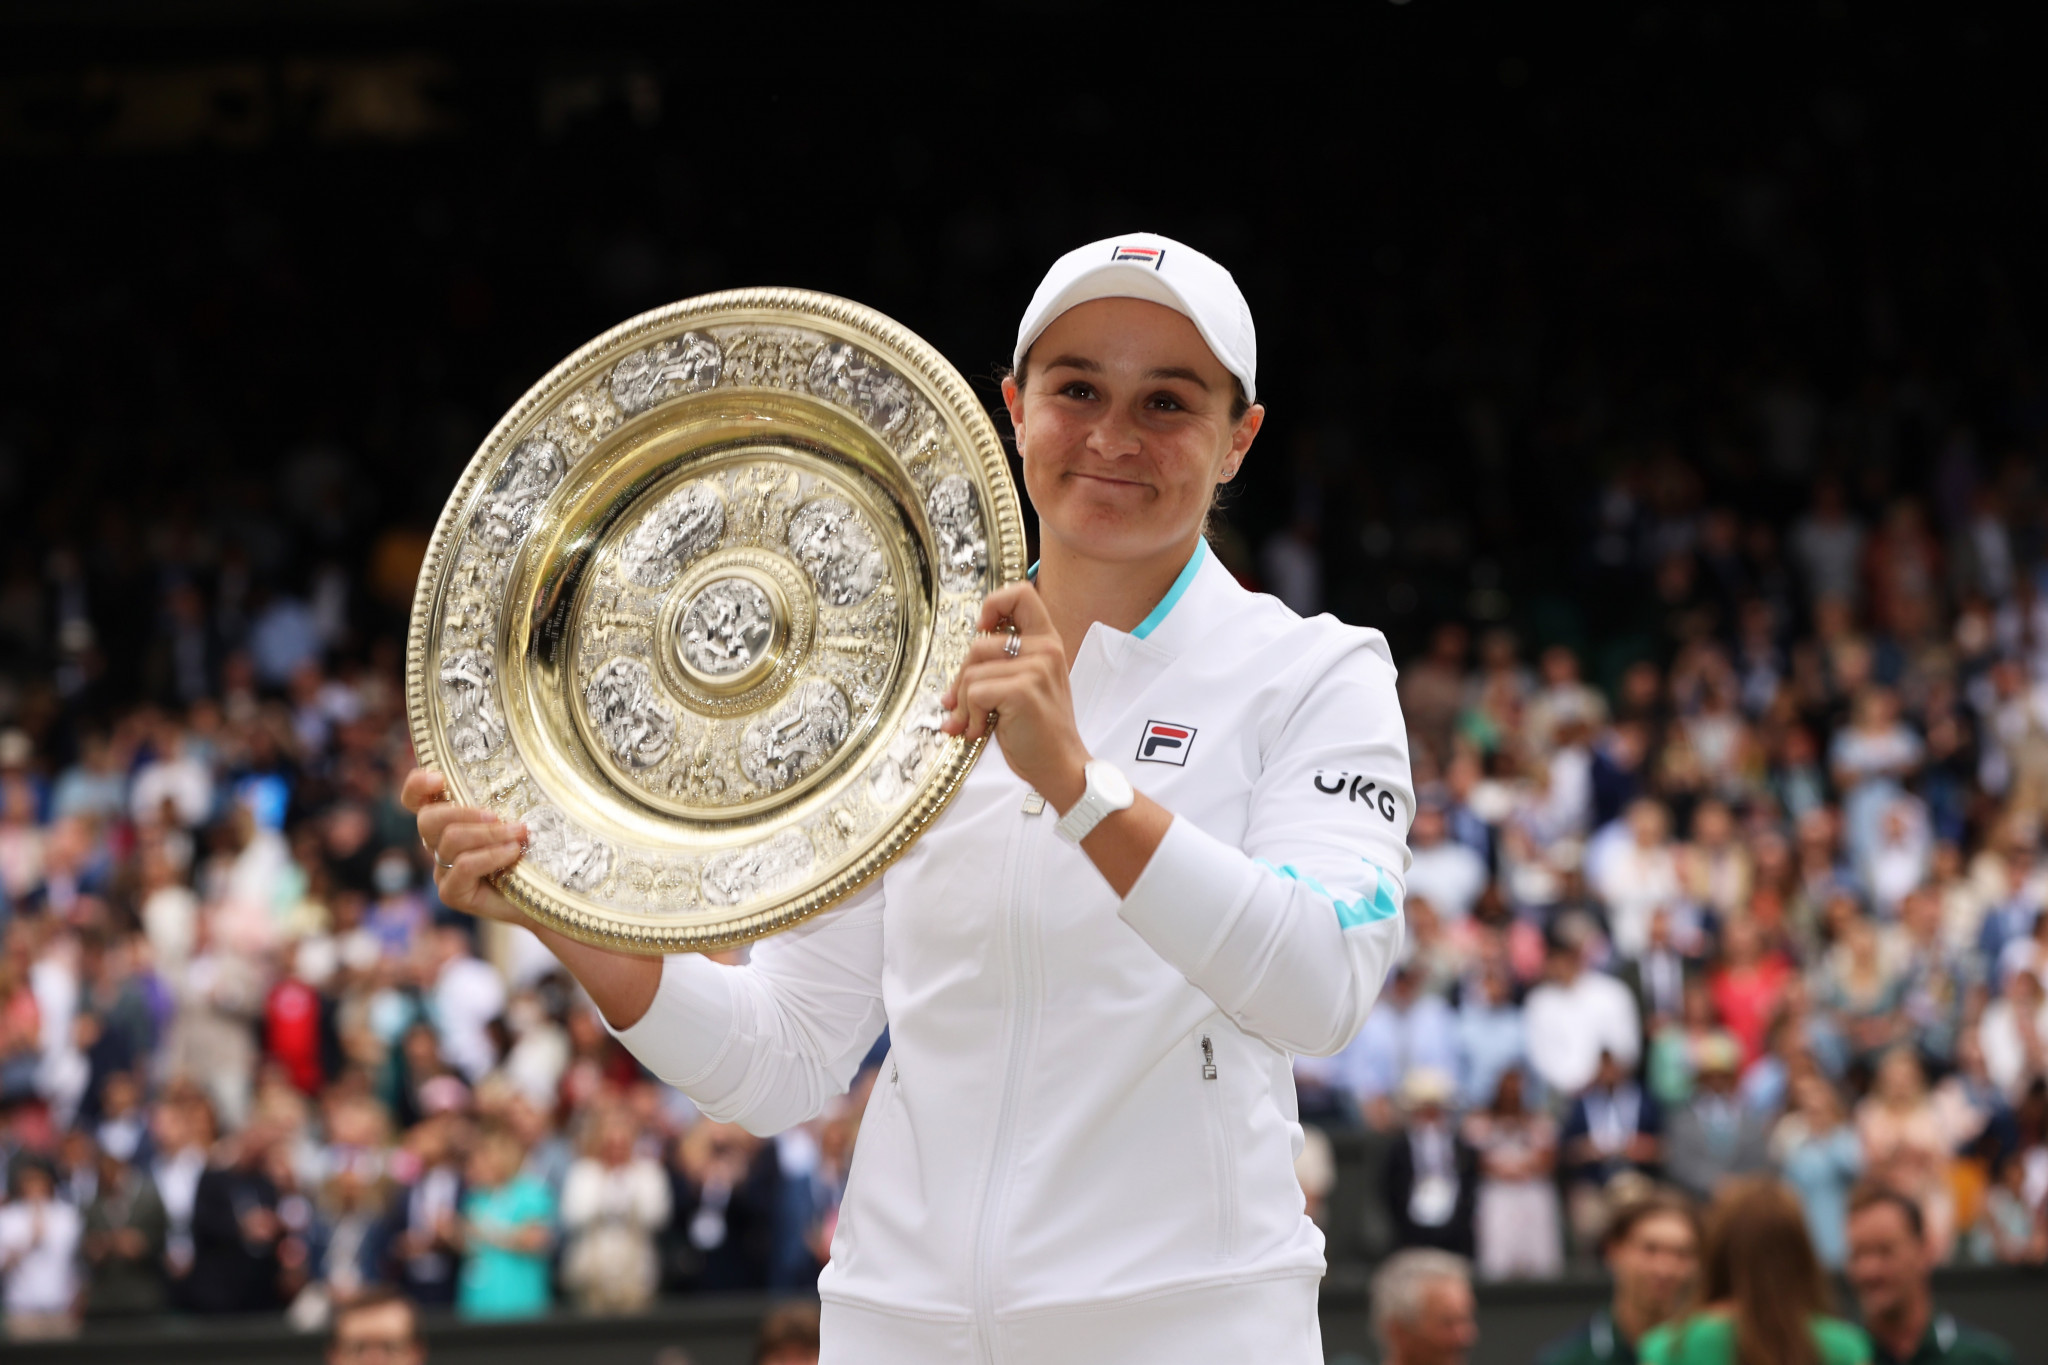 Ashleigh Barty will finish the year as world number one after winning five titles this season including her first women's singles Wimbledon crown ©Getty Images